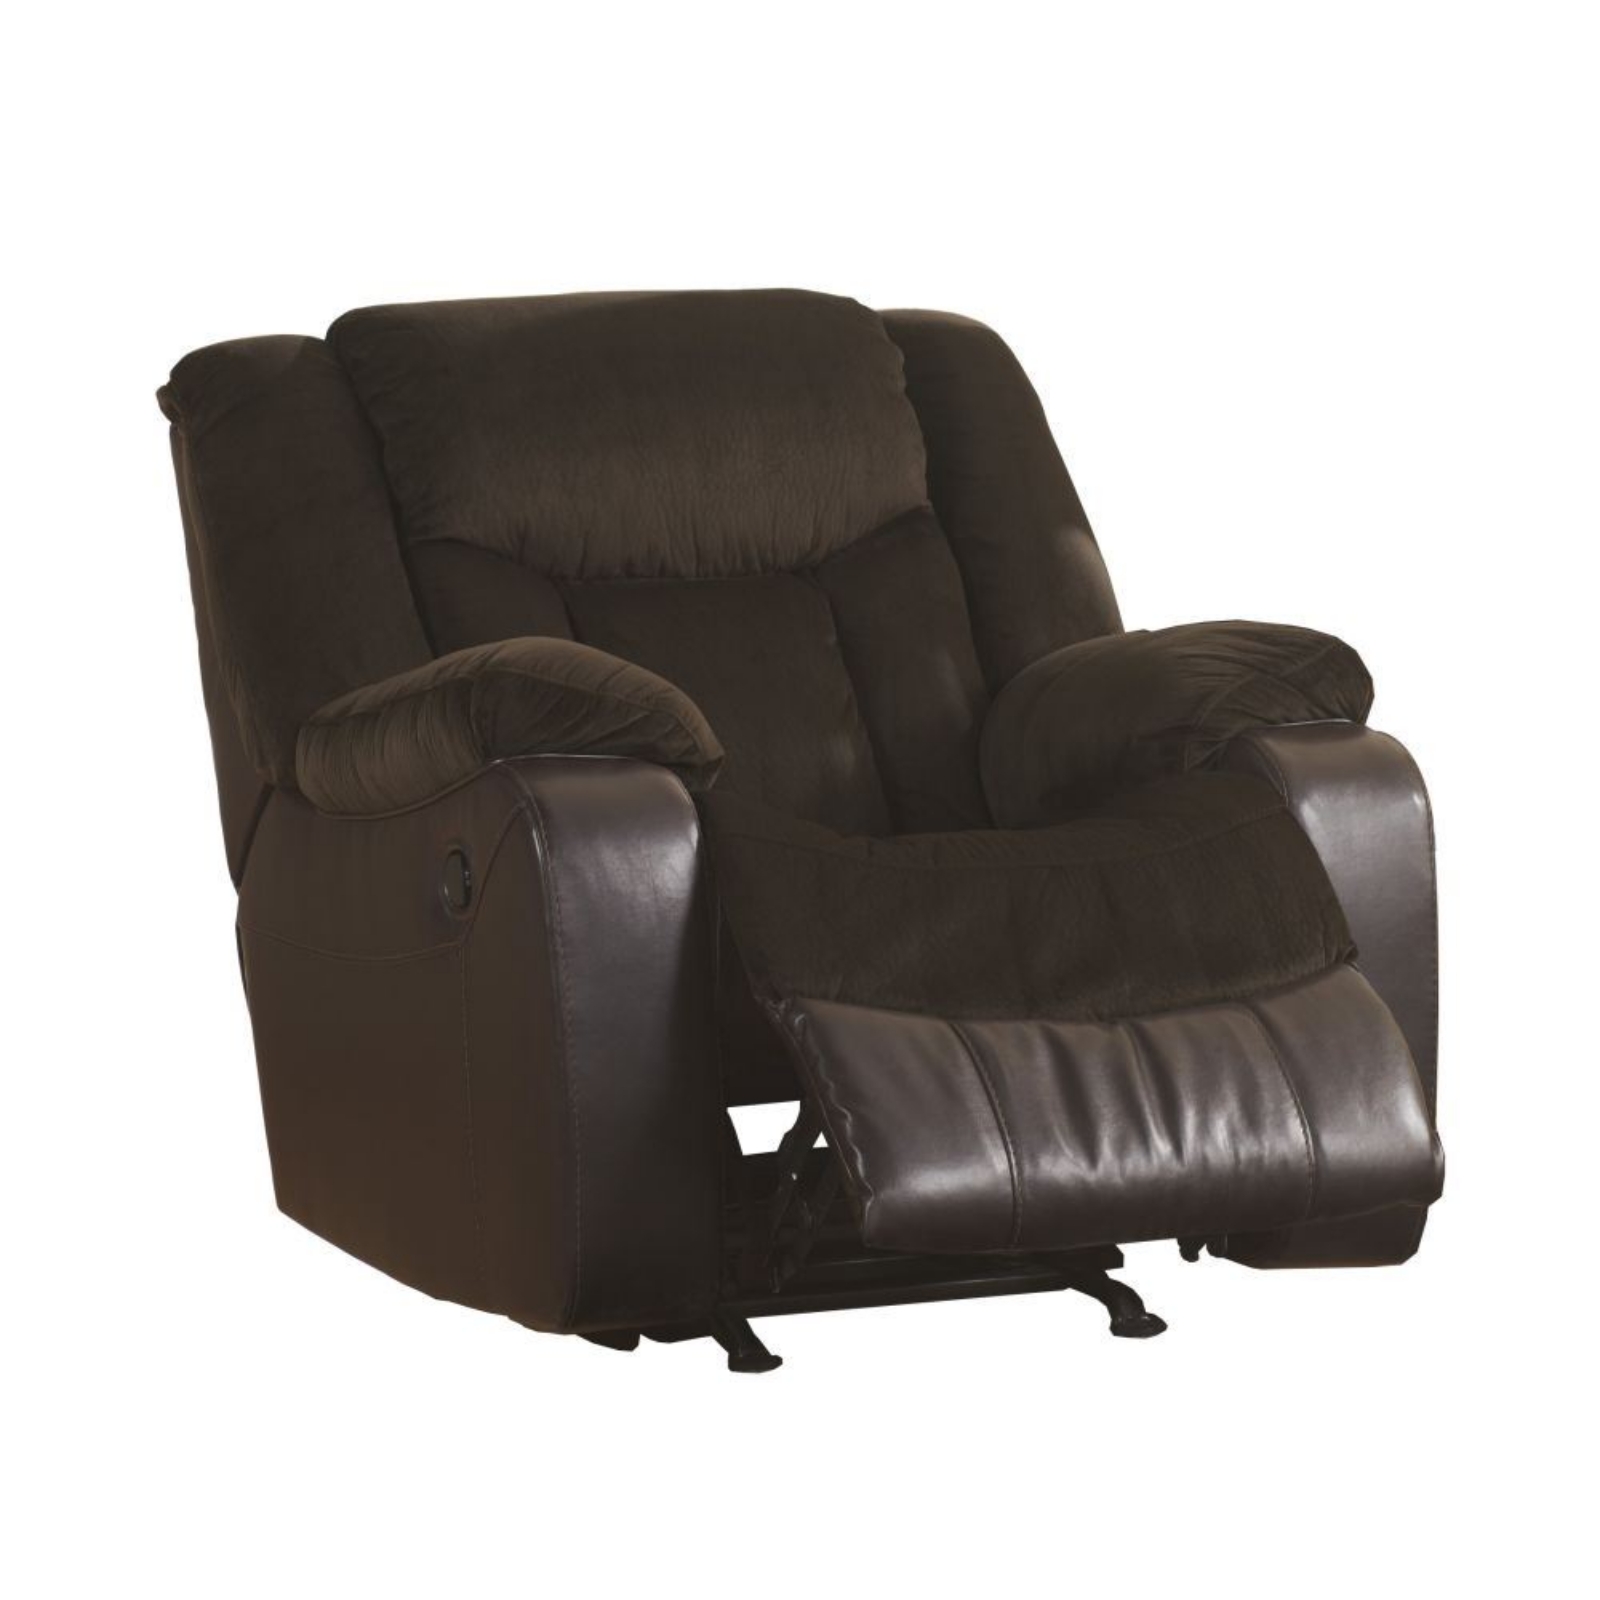 Picture of Tafton Recliner